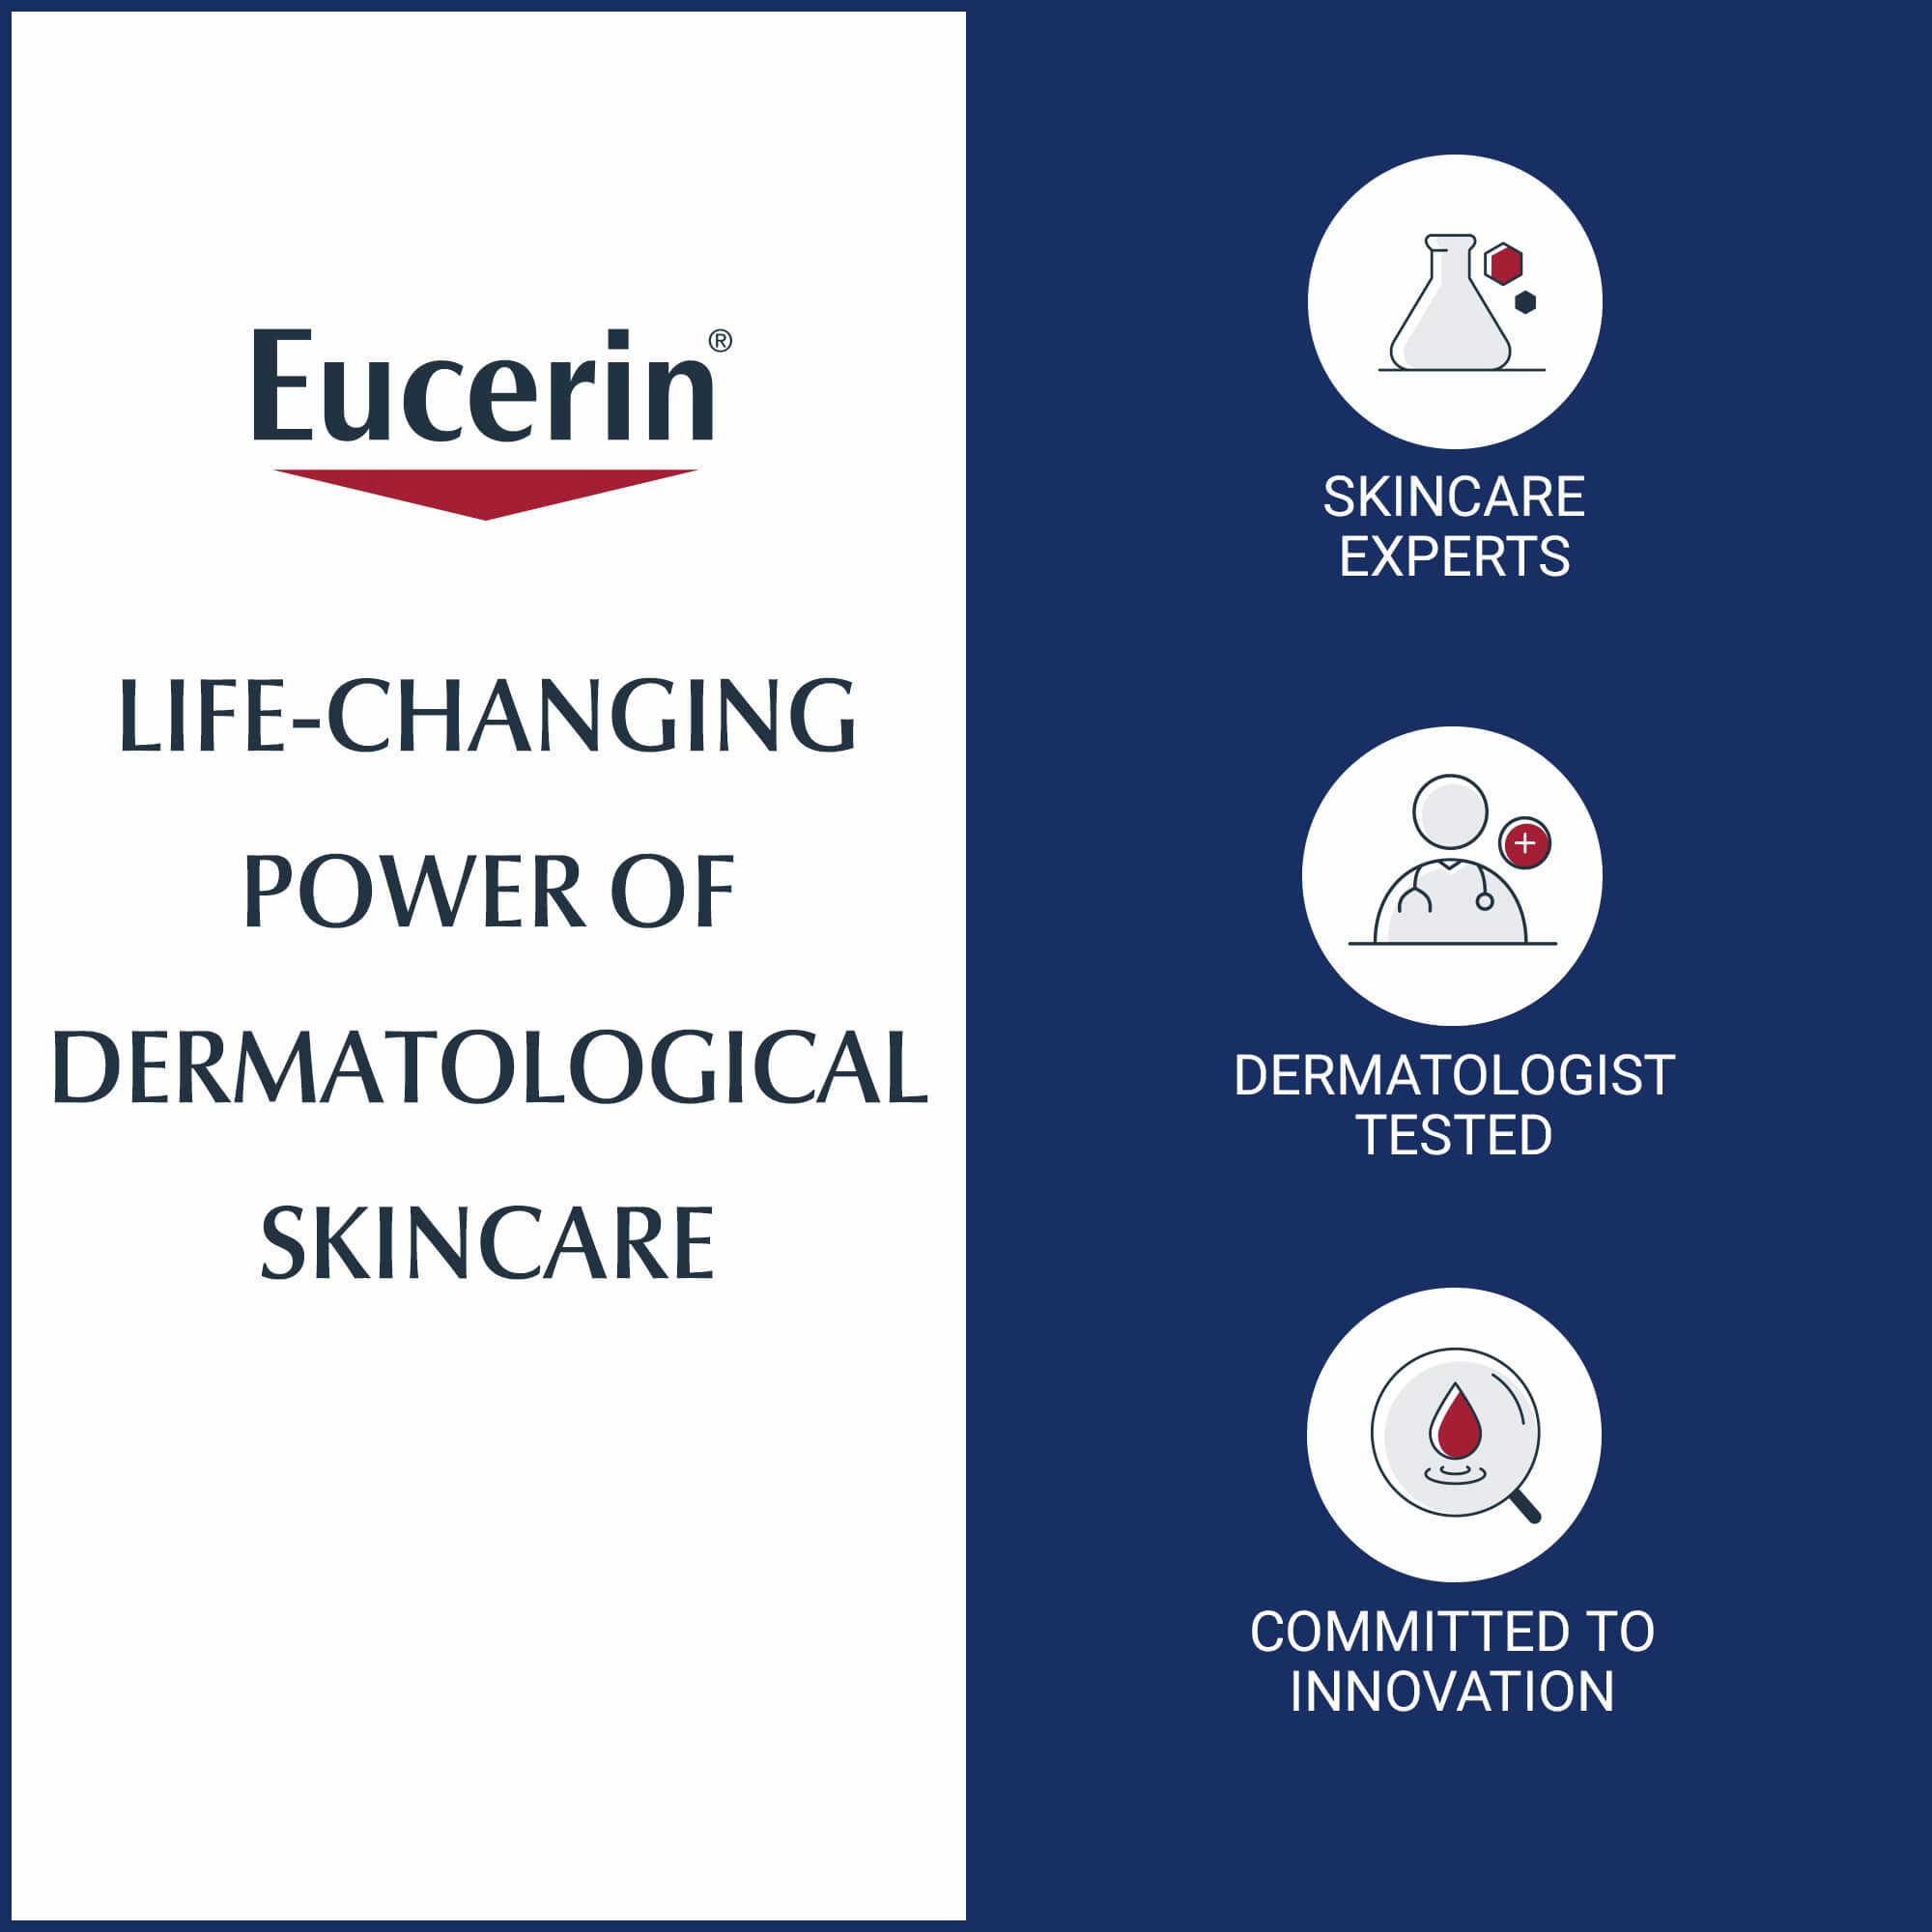 An image describing the advantages of using Eucerin skincare, such as dermatologist tested